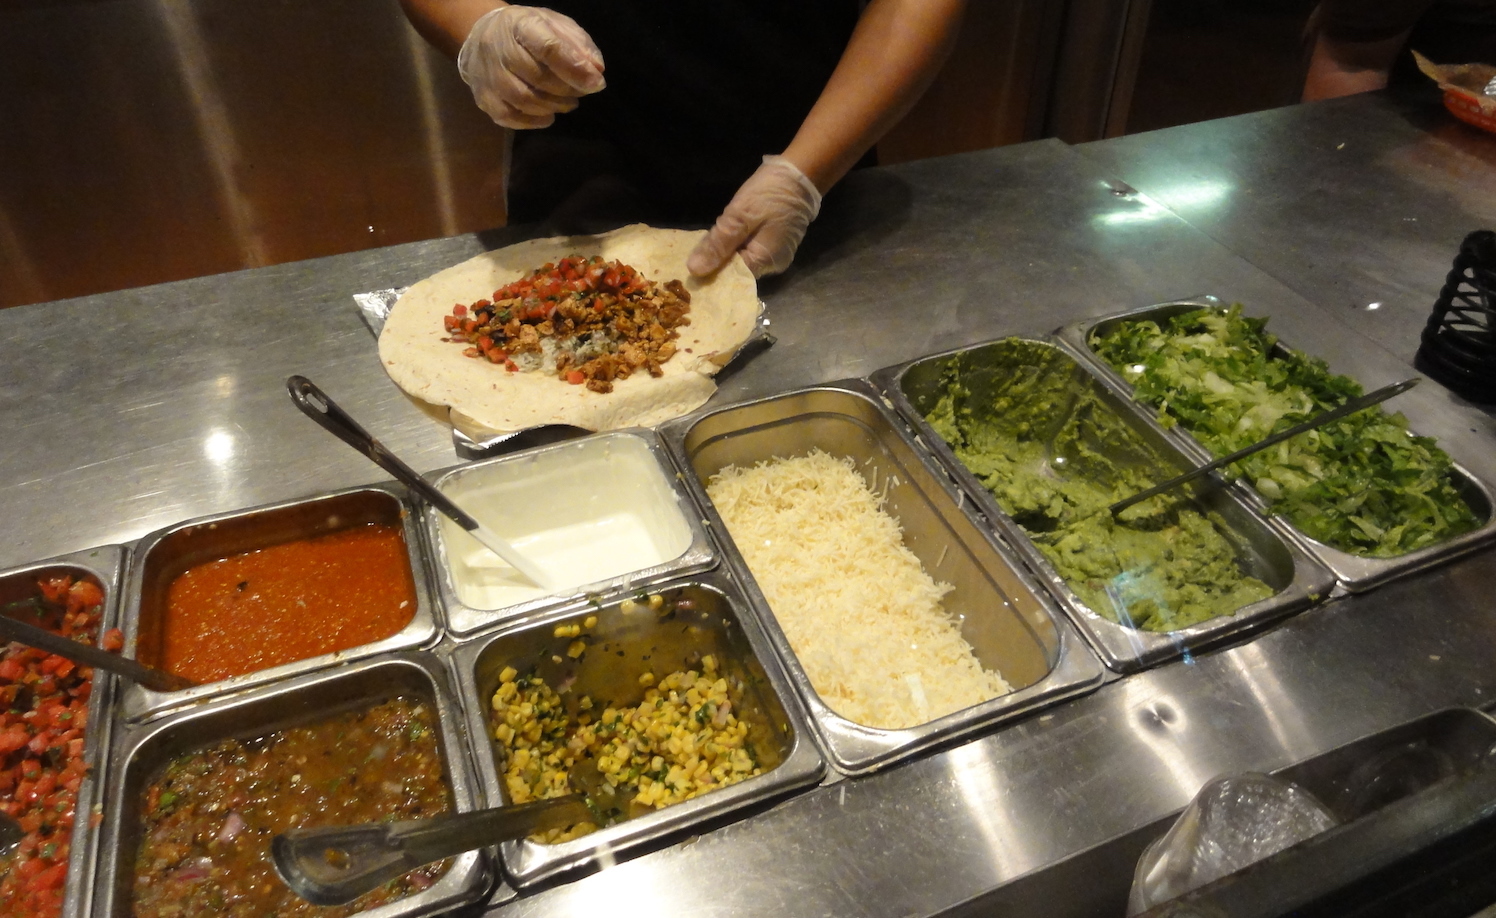 Burrito assembly at Chipotle